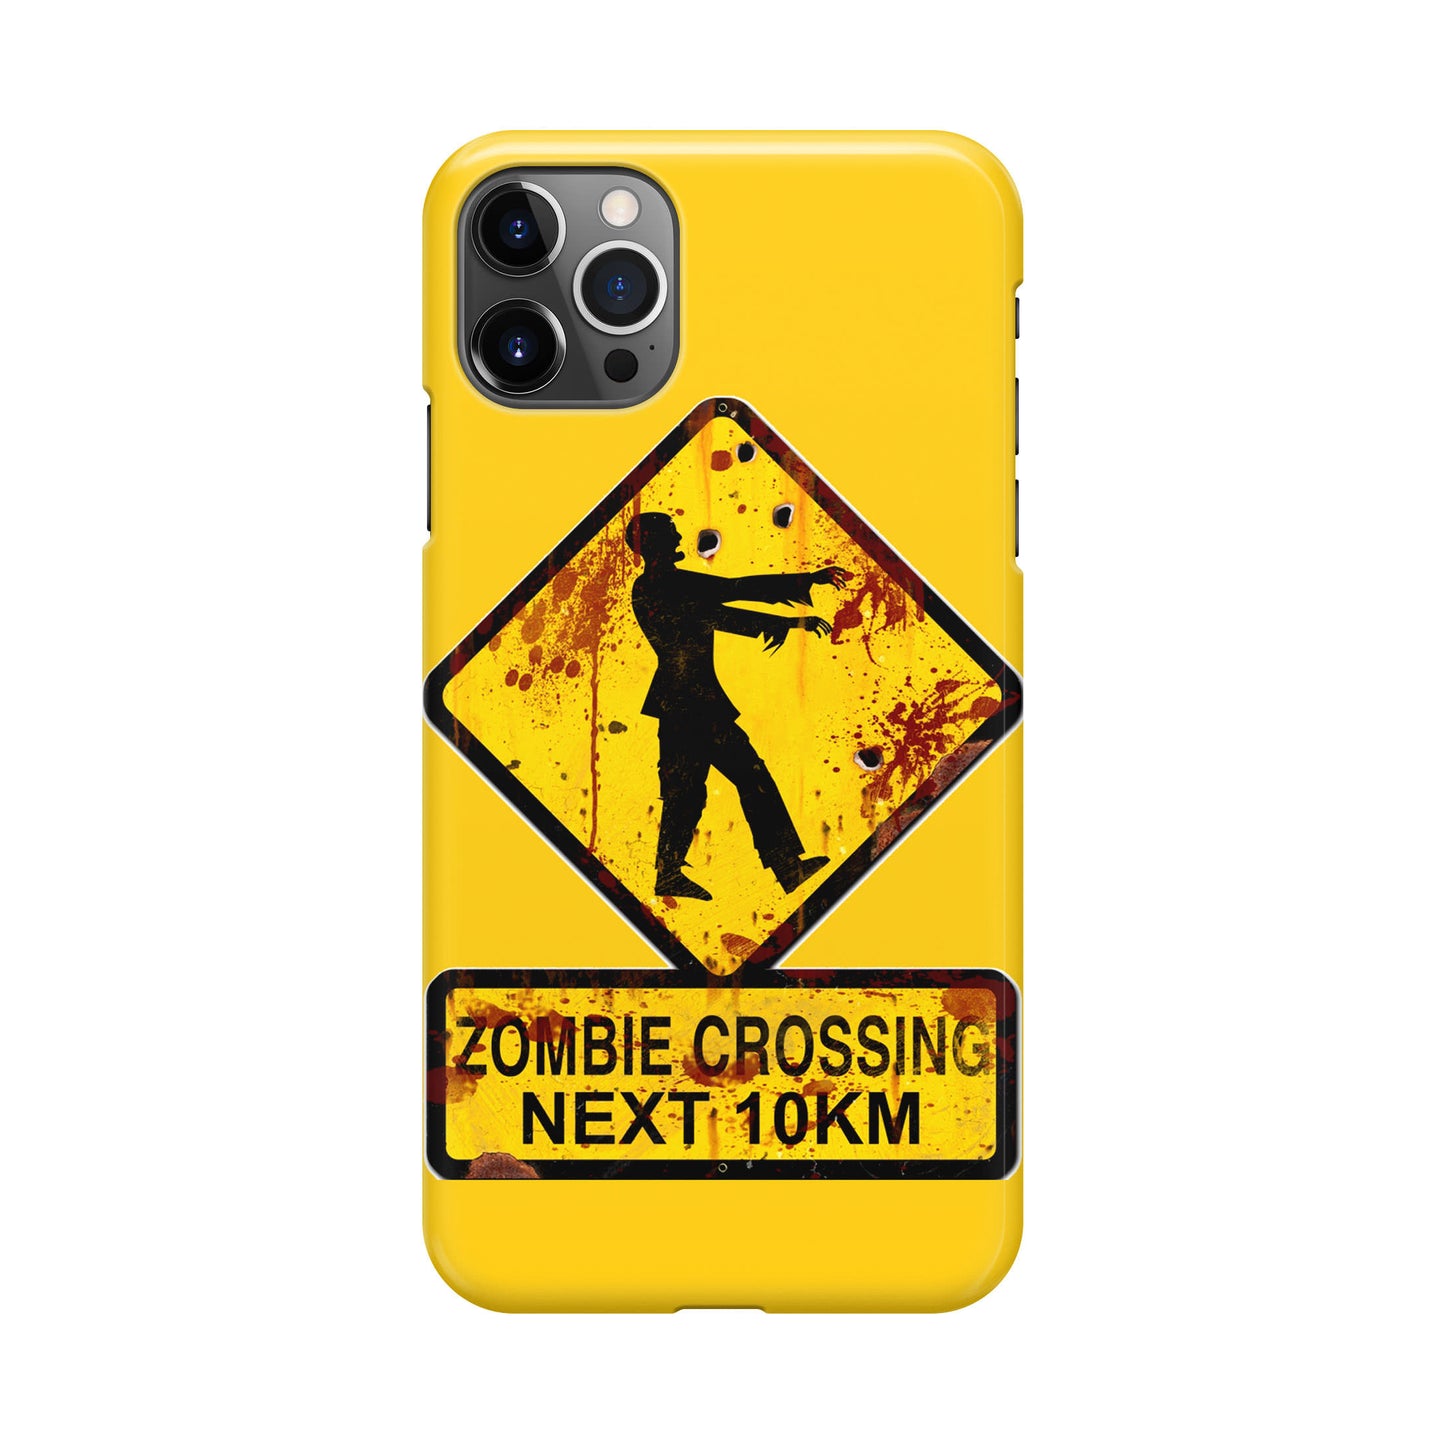 Zombie Crossing Sign iPhone 12 Pro Case